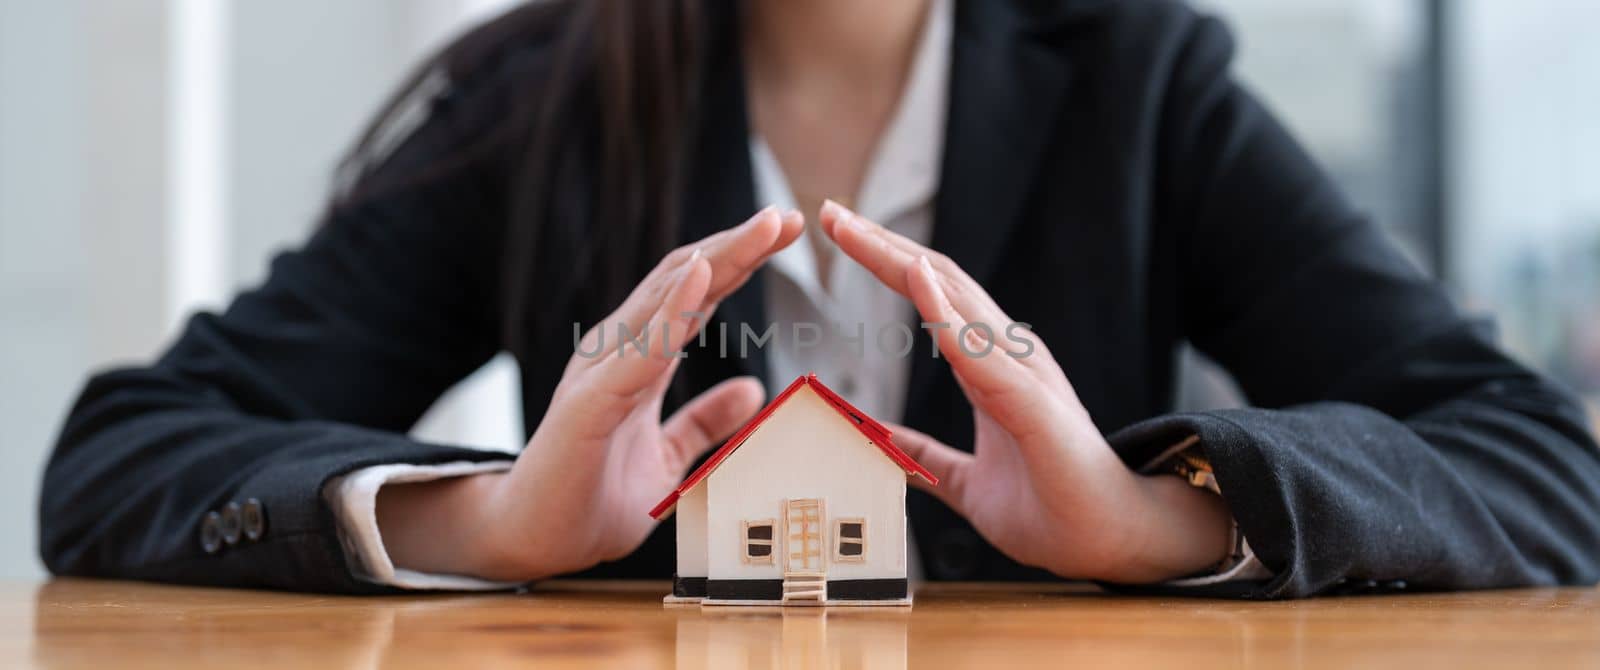 Wooden toy house protected by hands. Home insurance concept. banner ratio.